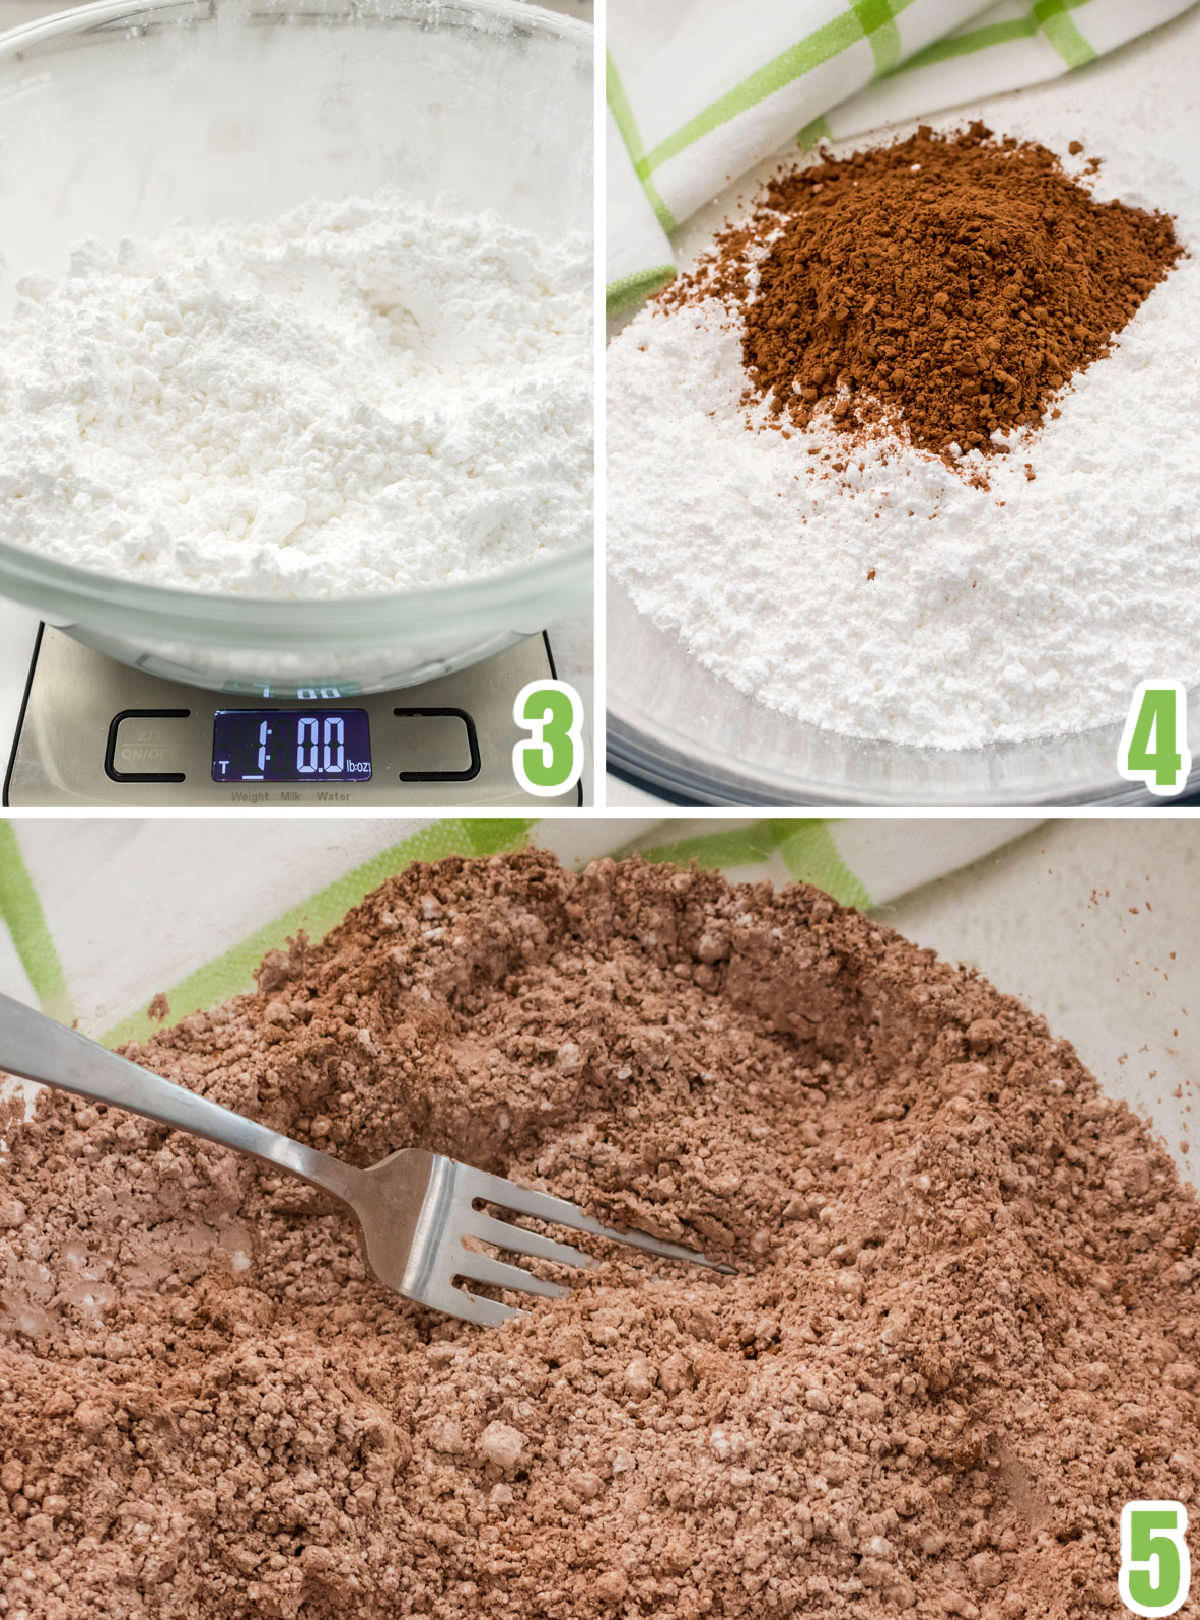 Collage image showing the steps for adding the cocoa powder to the powdered sugar.